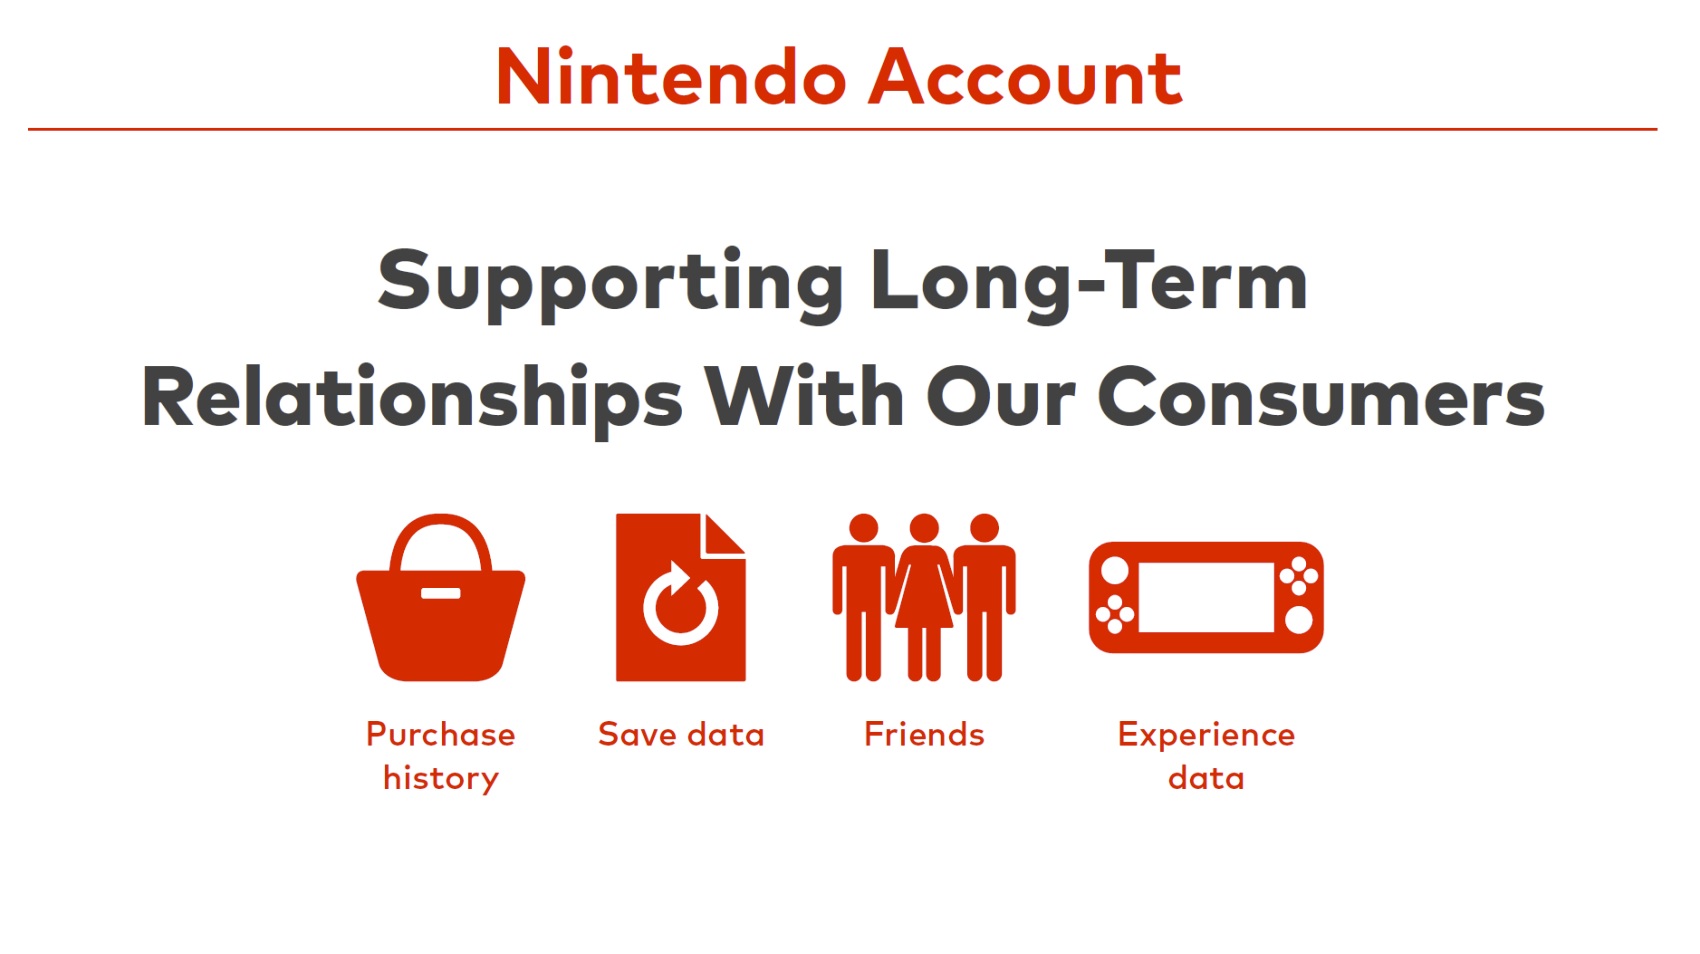 There are now over 330 million Nintendo Accounts